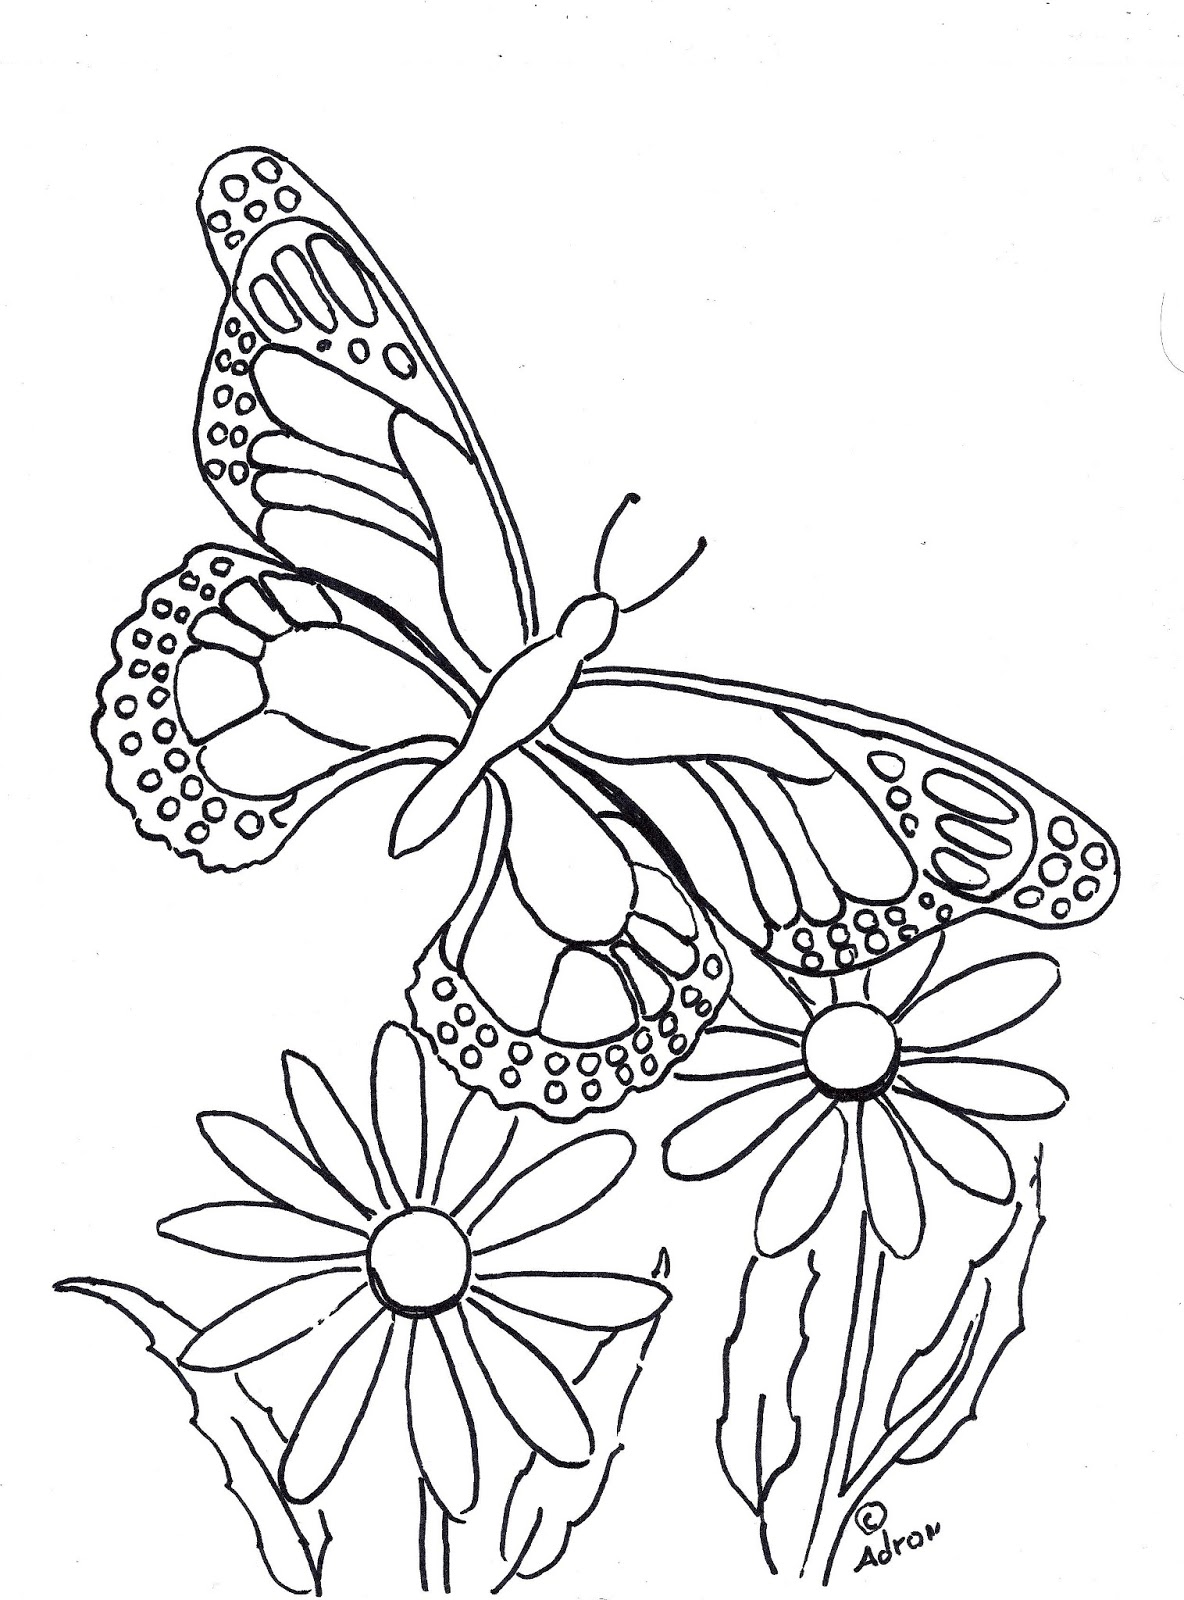 Download Coloring Pages for Kids by Mr. Adron: Butterfly Coloring ...